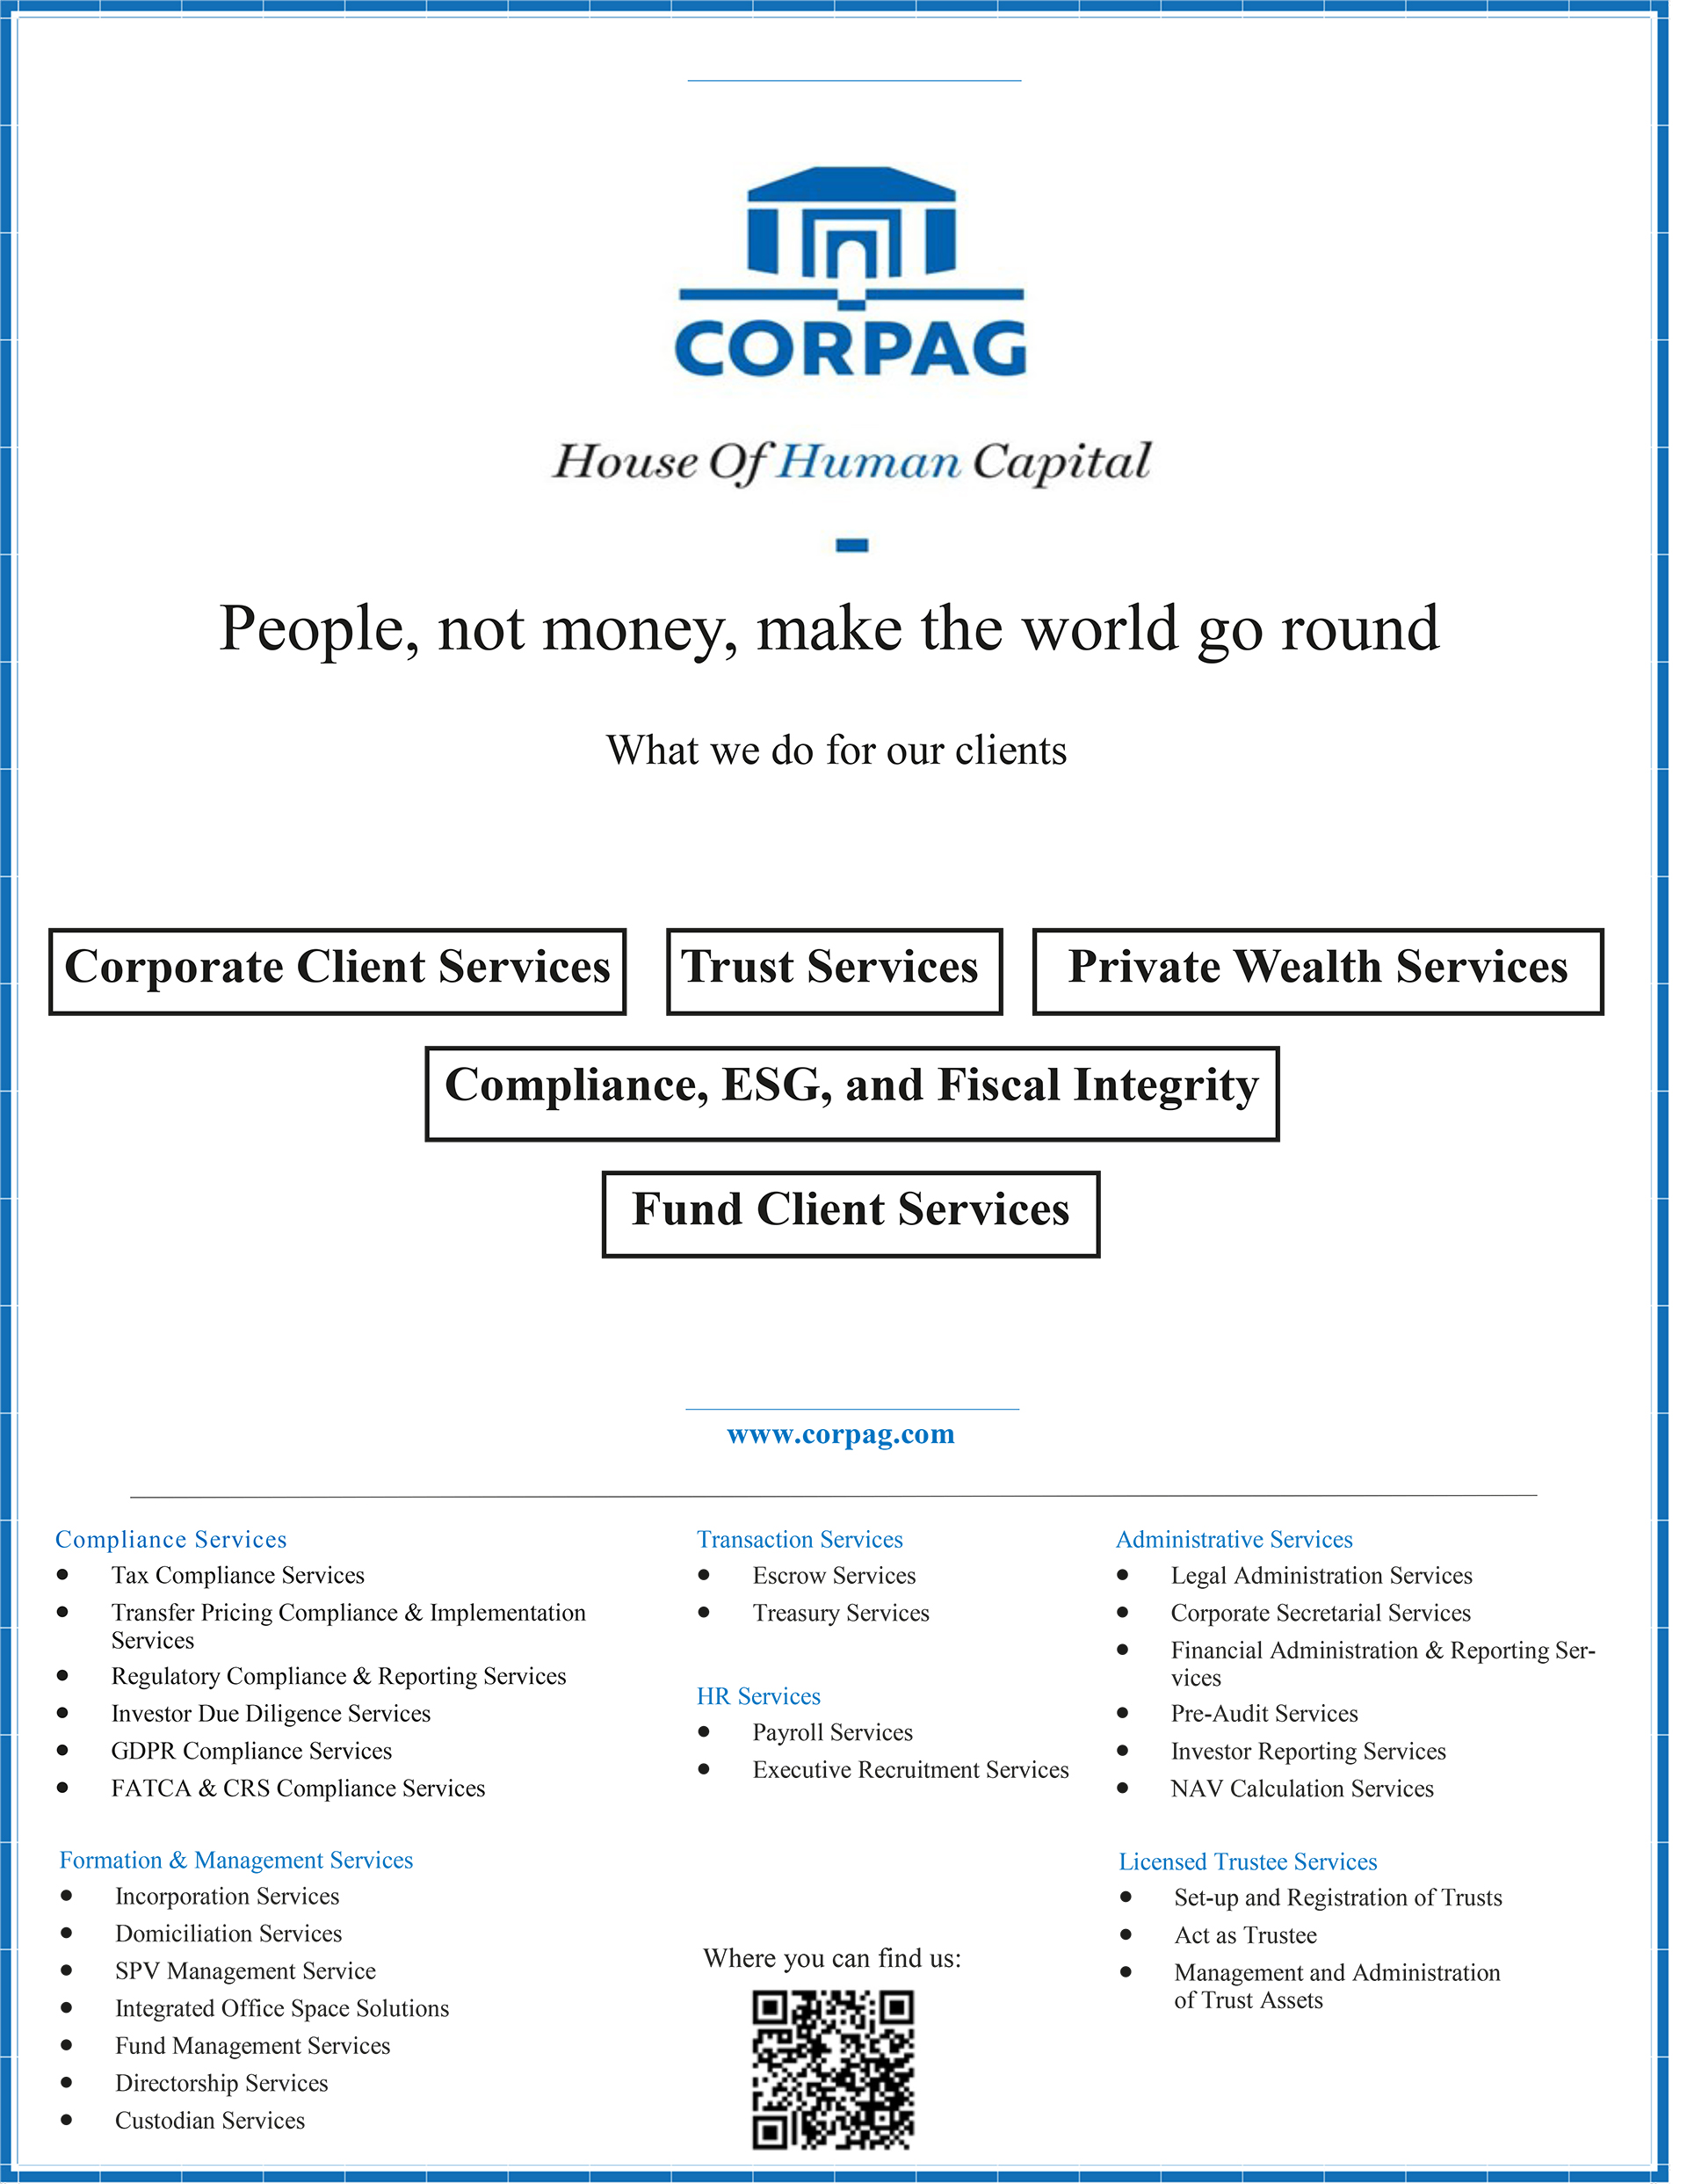 CORPAG STEP Miami's 12th Annual Summit